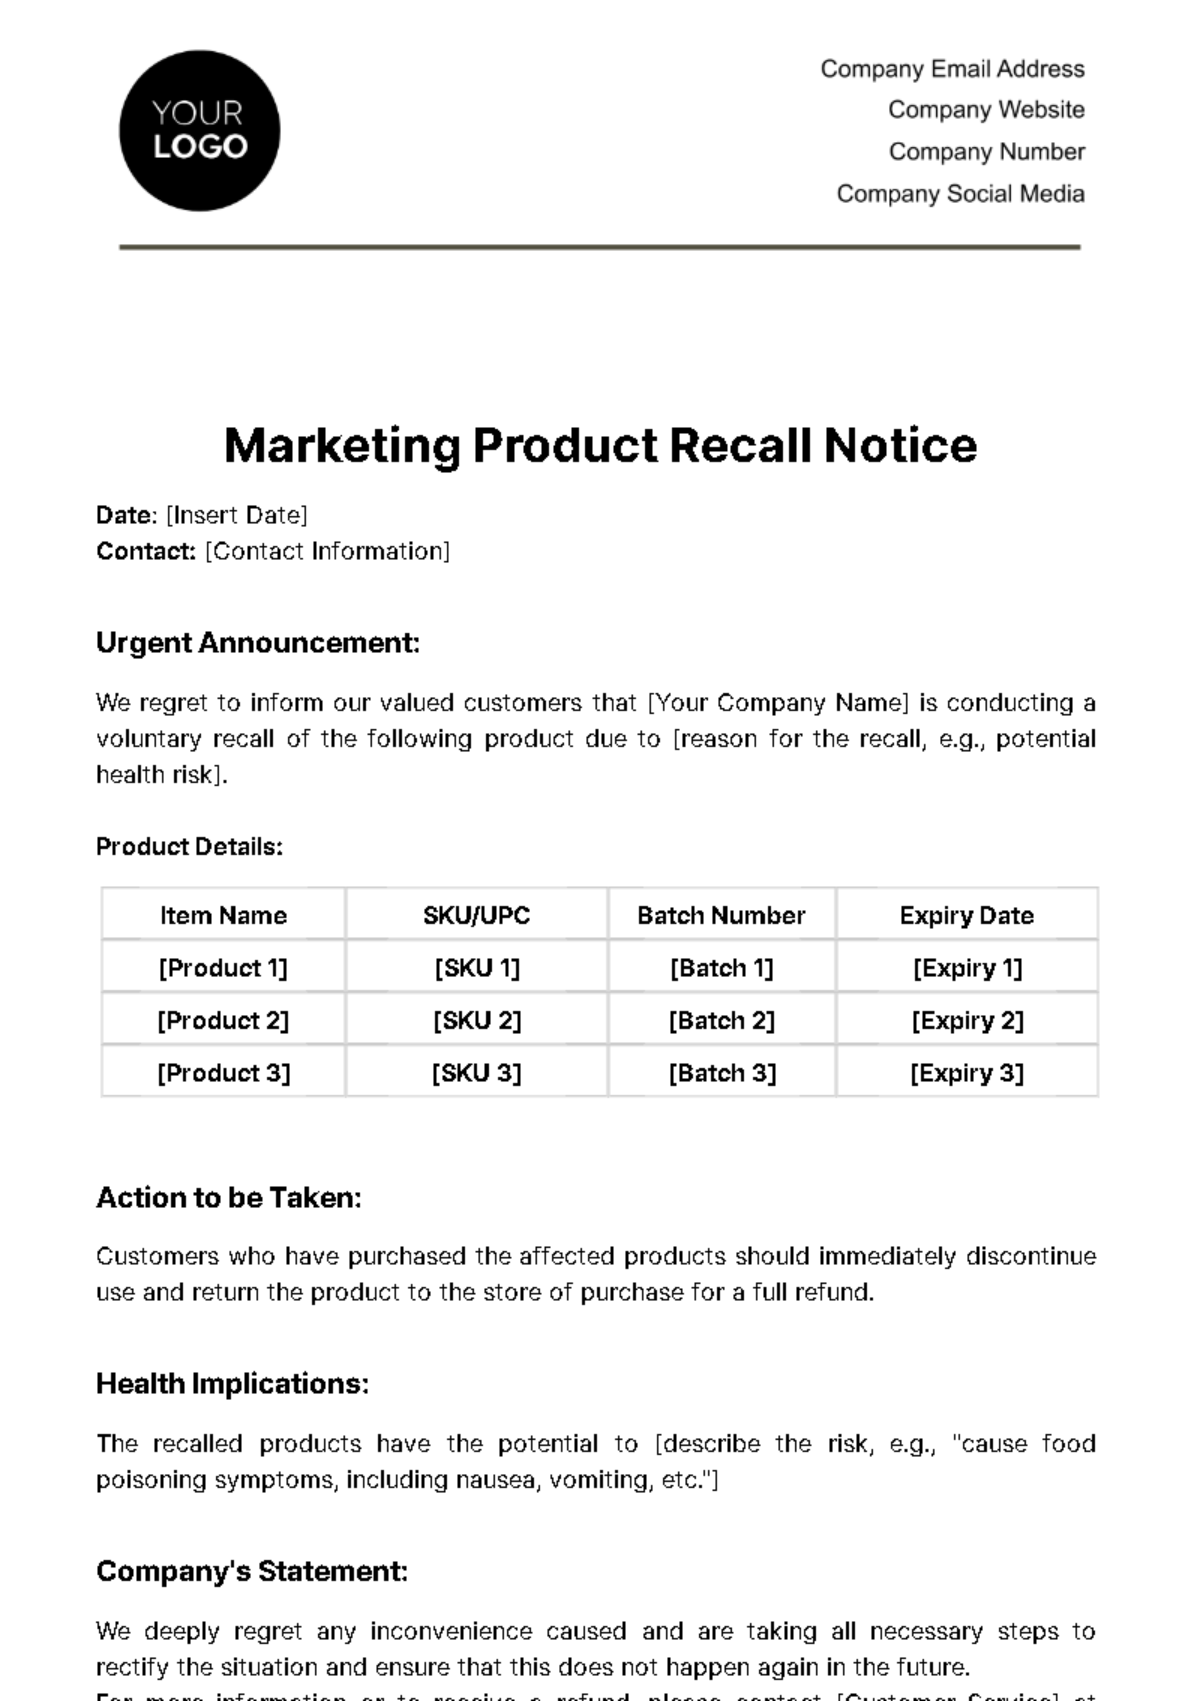 Free Marketing Product Recall Notice Template